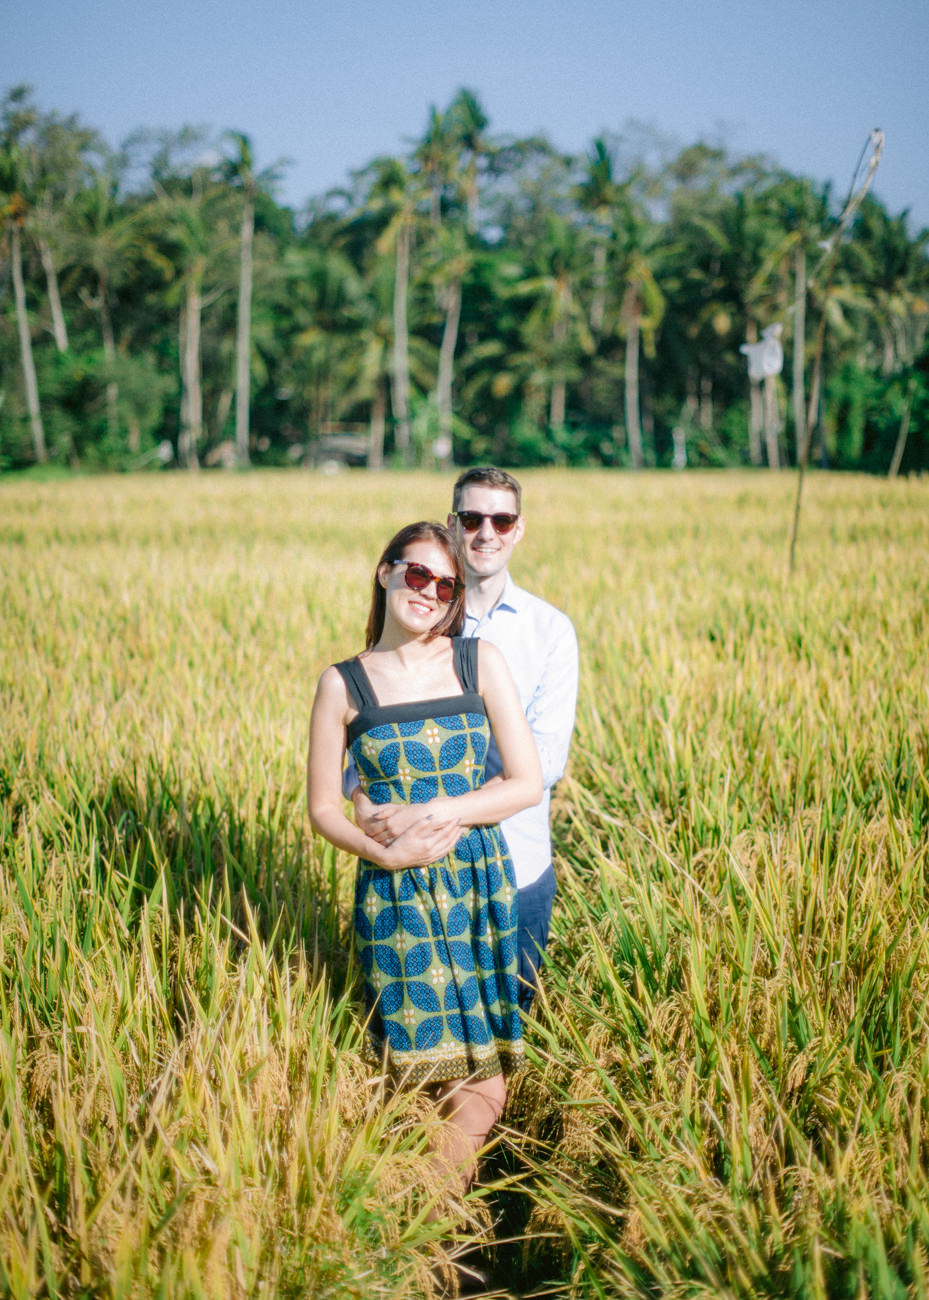 Engagement photos in rice field